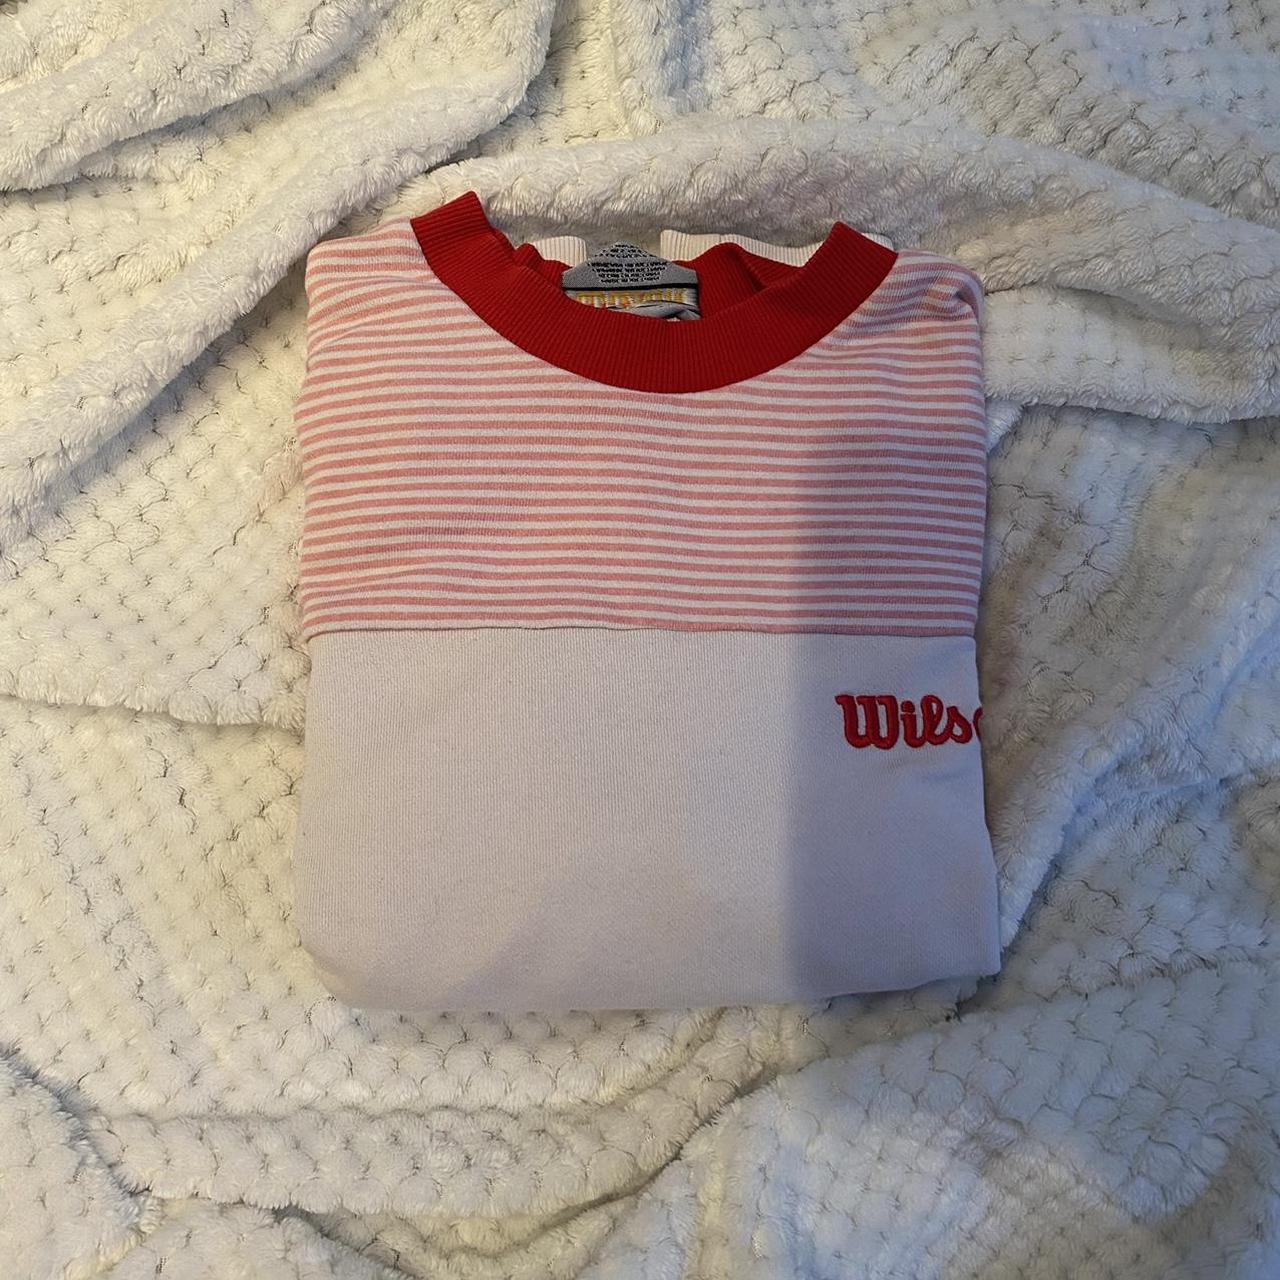 Forever 21 Women's Red and White Sweatshirt